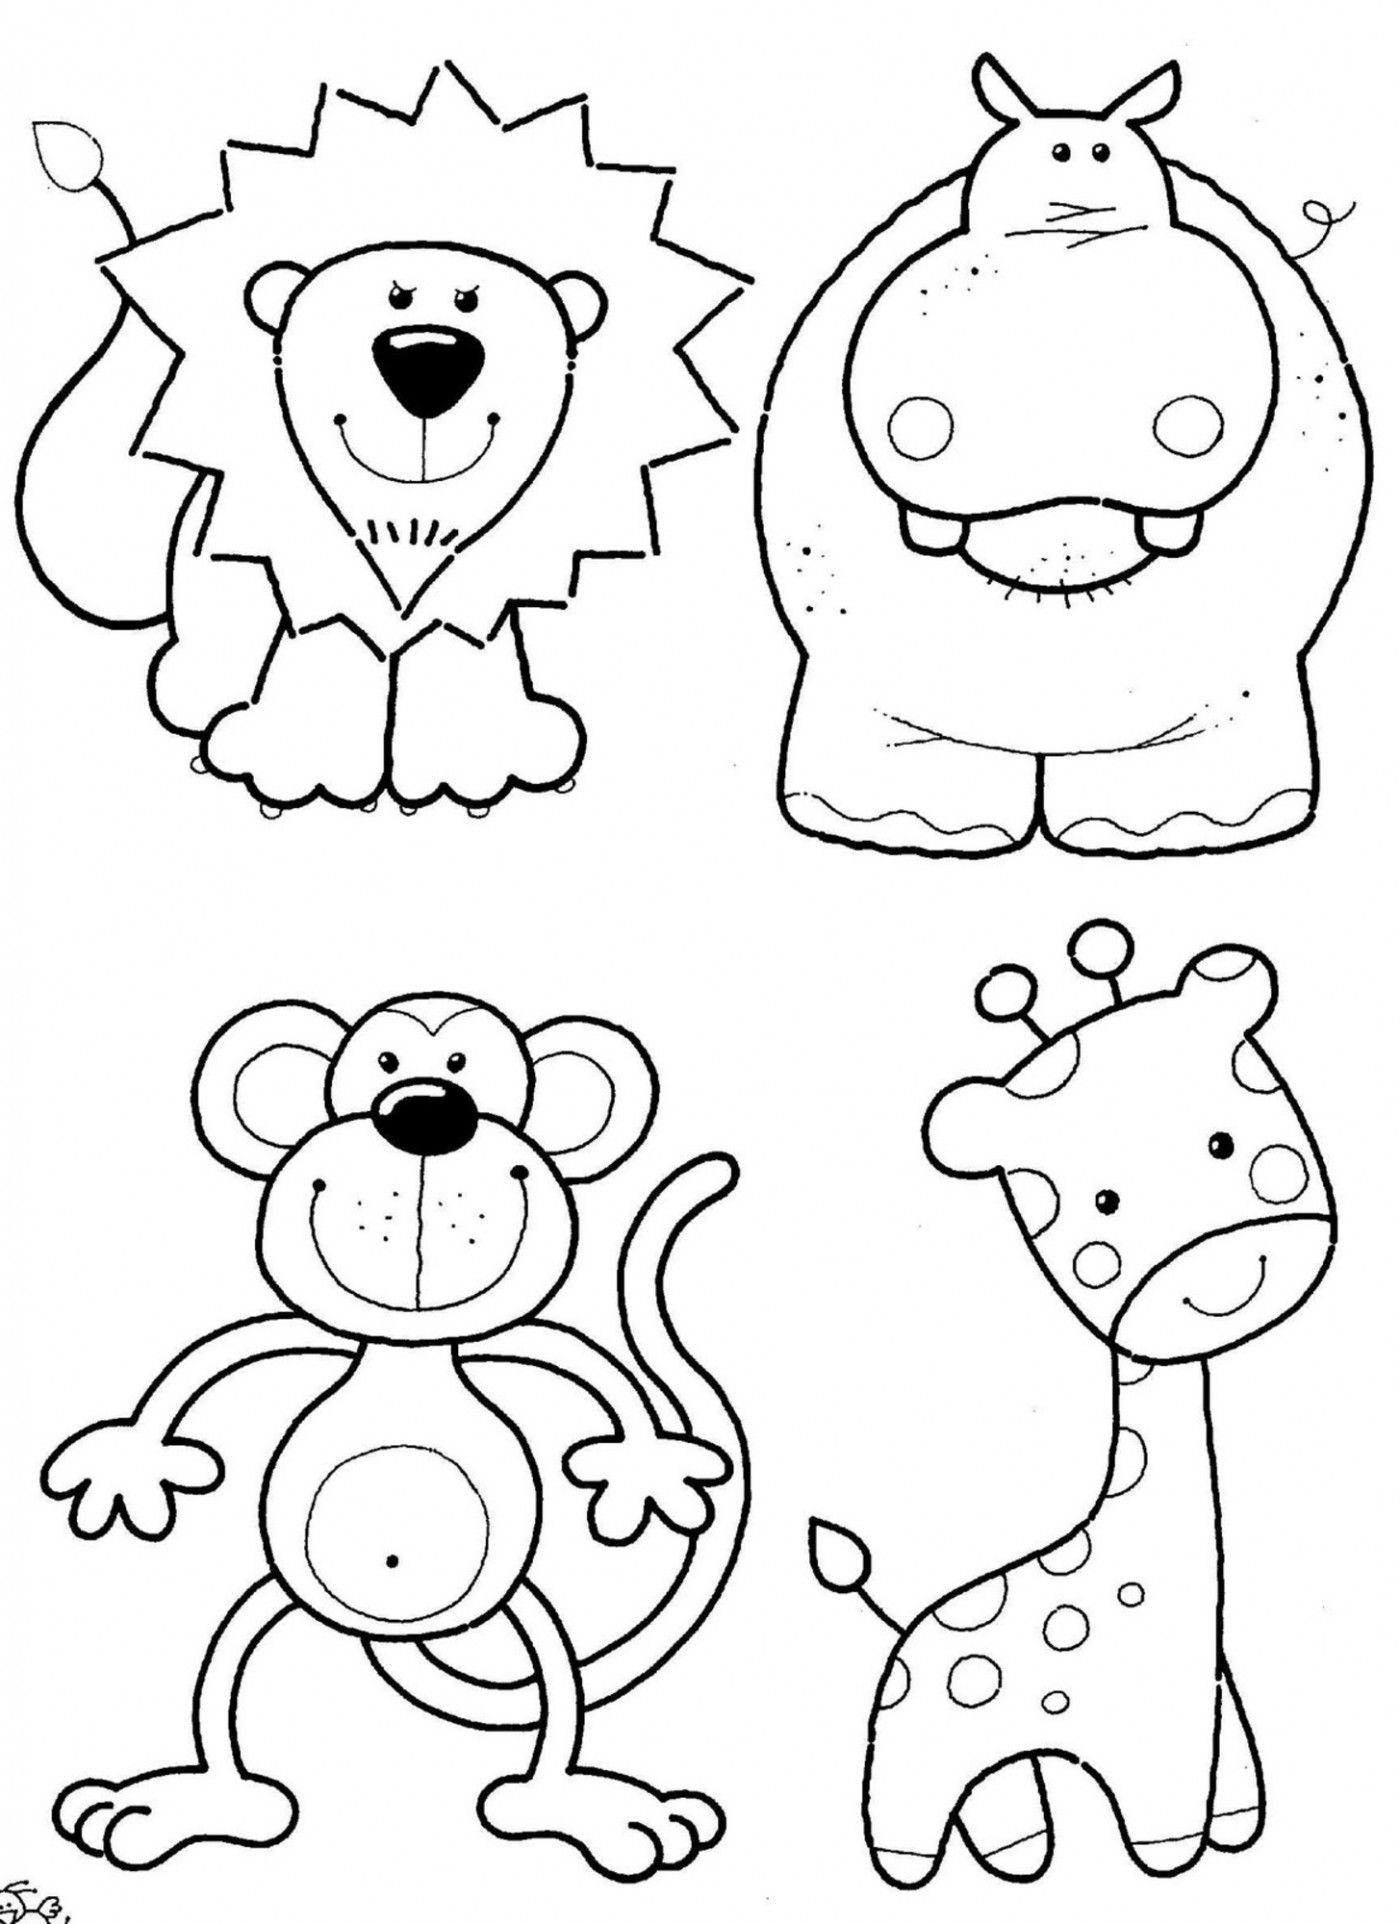 Camel Cartoon Animals Coloring Pages For Kids Printable Free ...